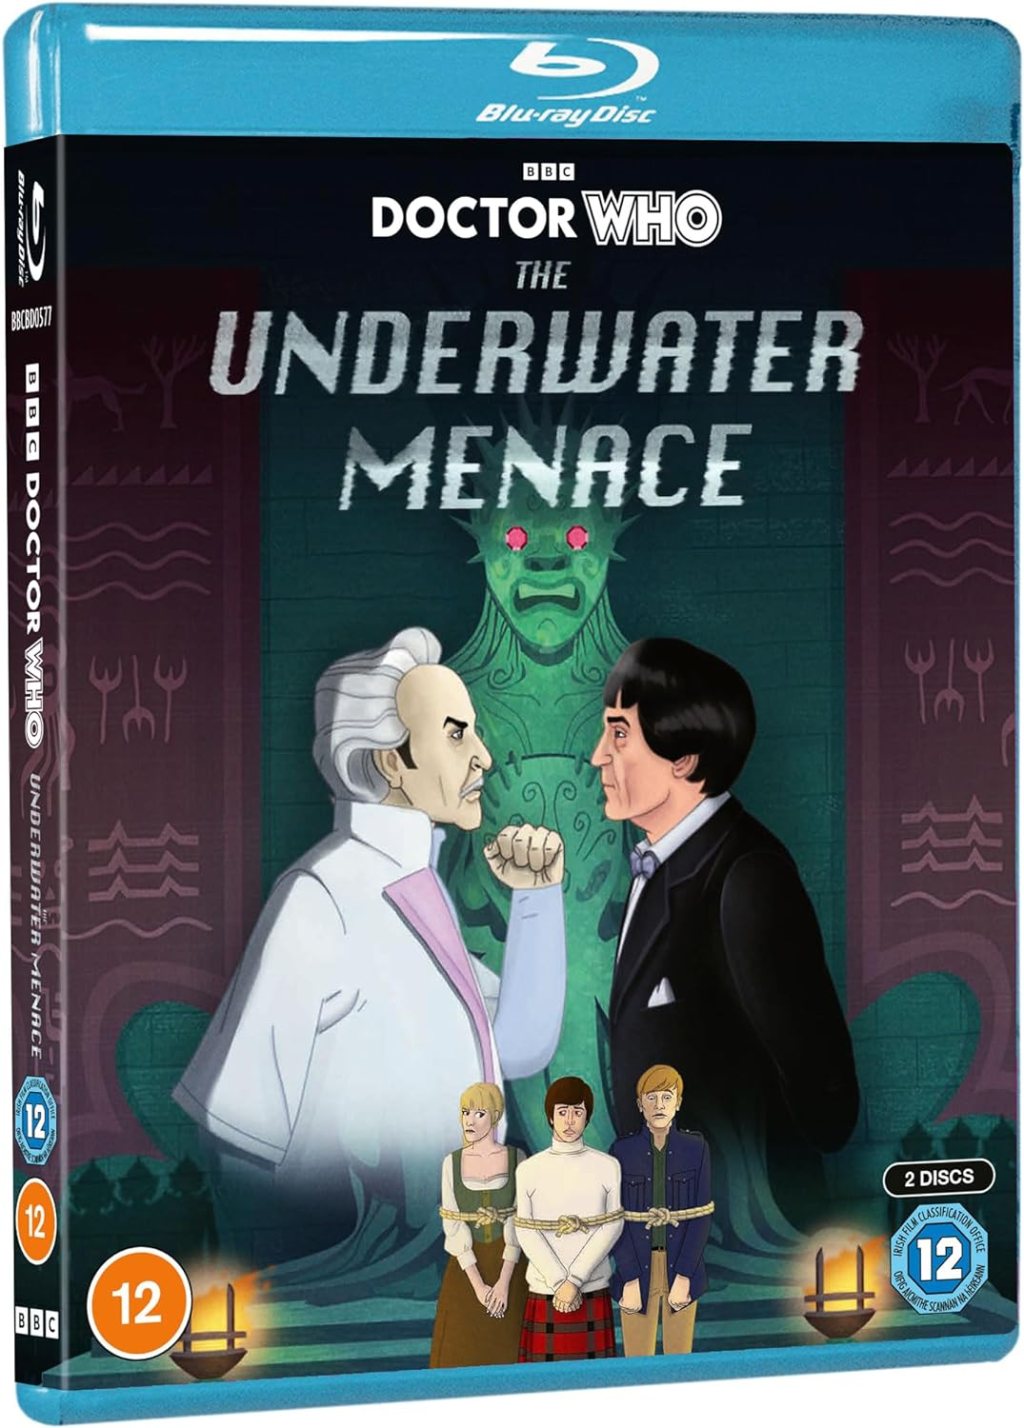 Doctor Who: The Underwater Menace review and Blu-ray preview